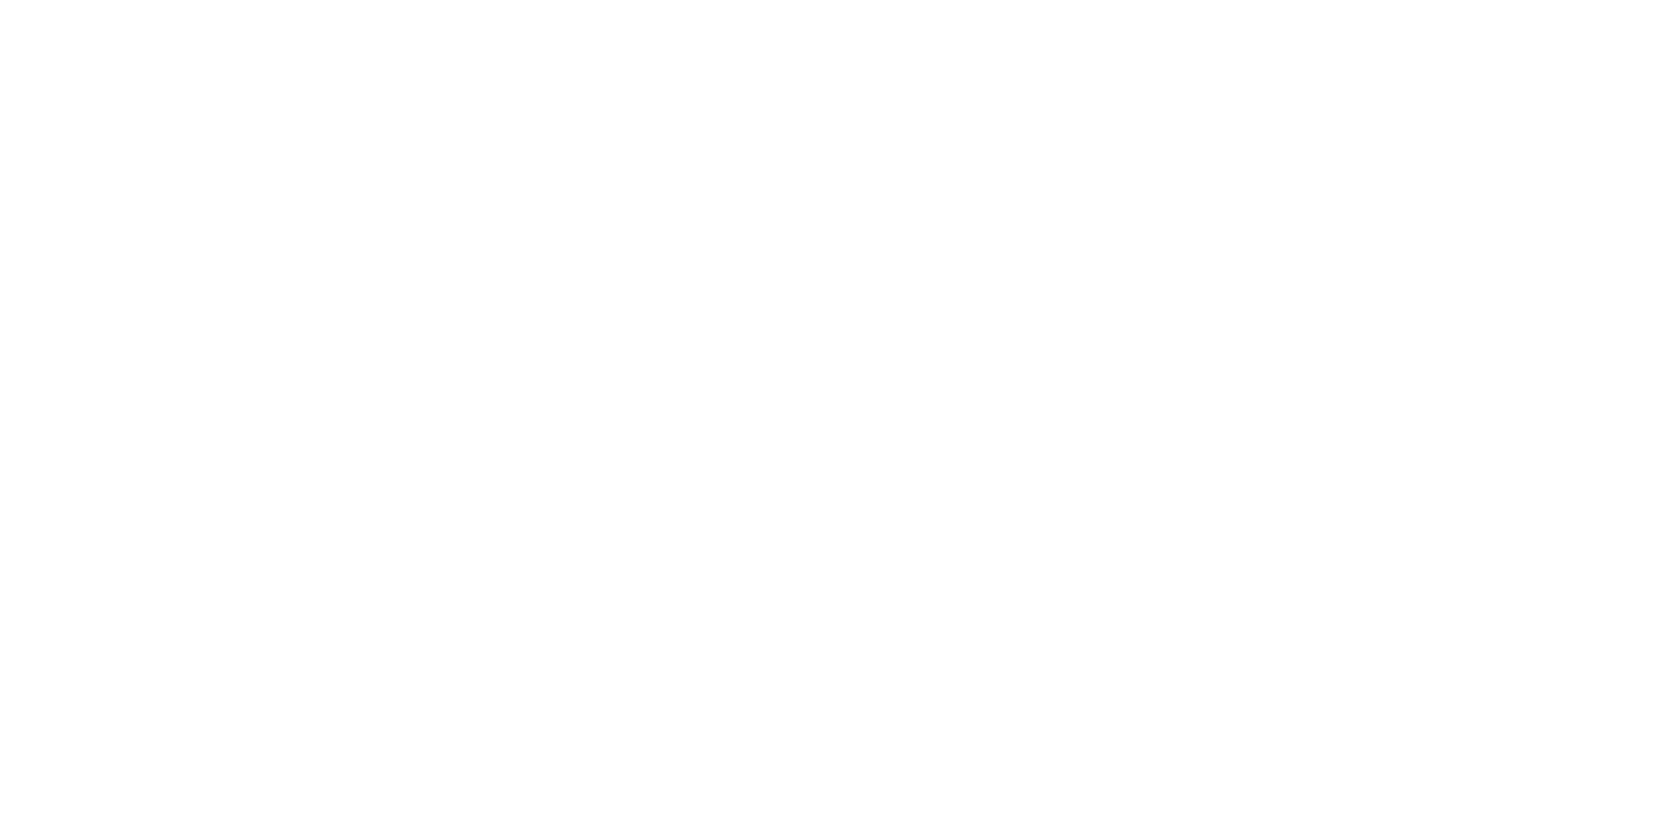 Laird Law Male Grooming